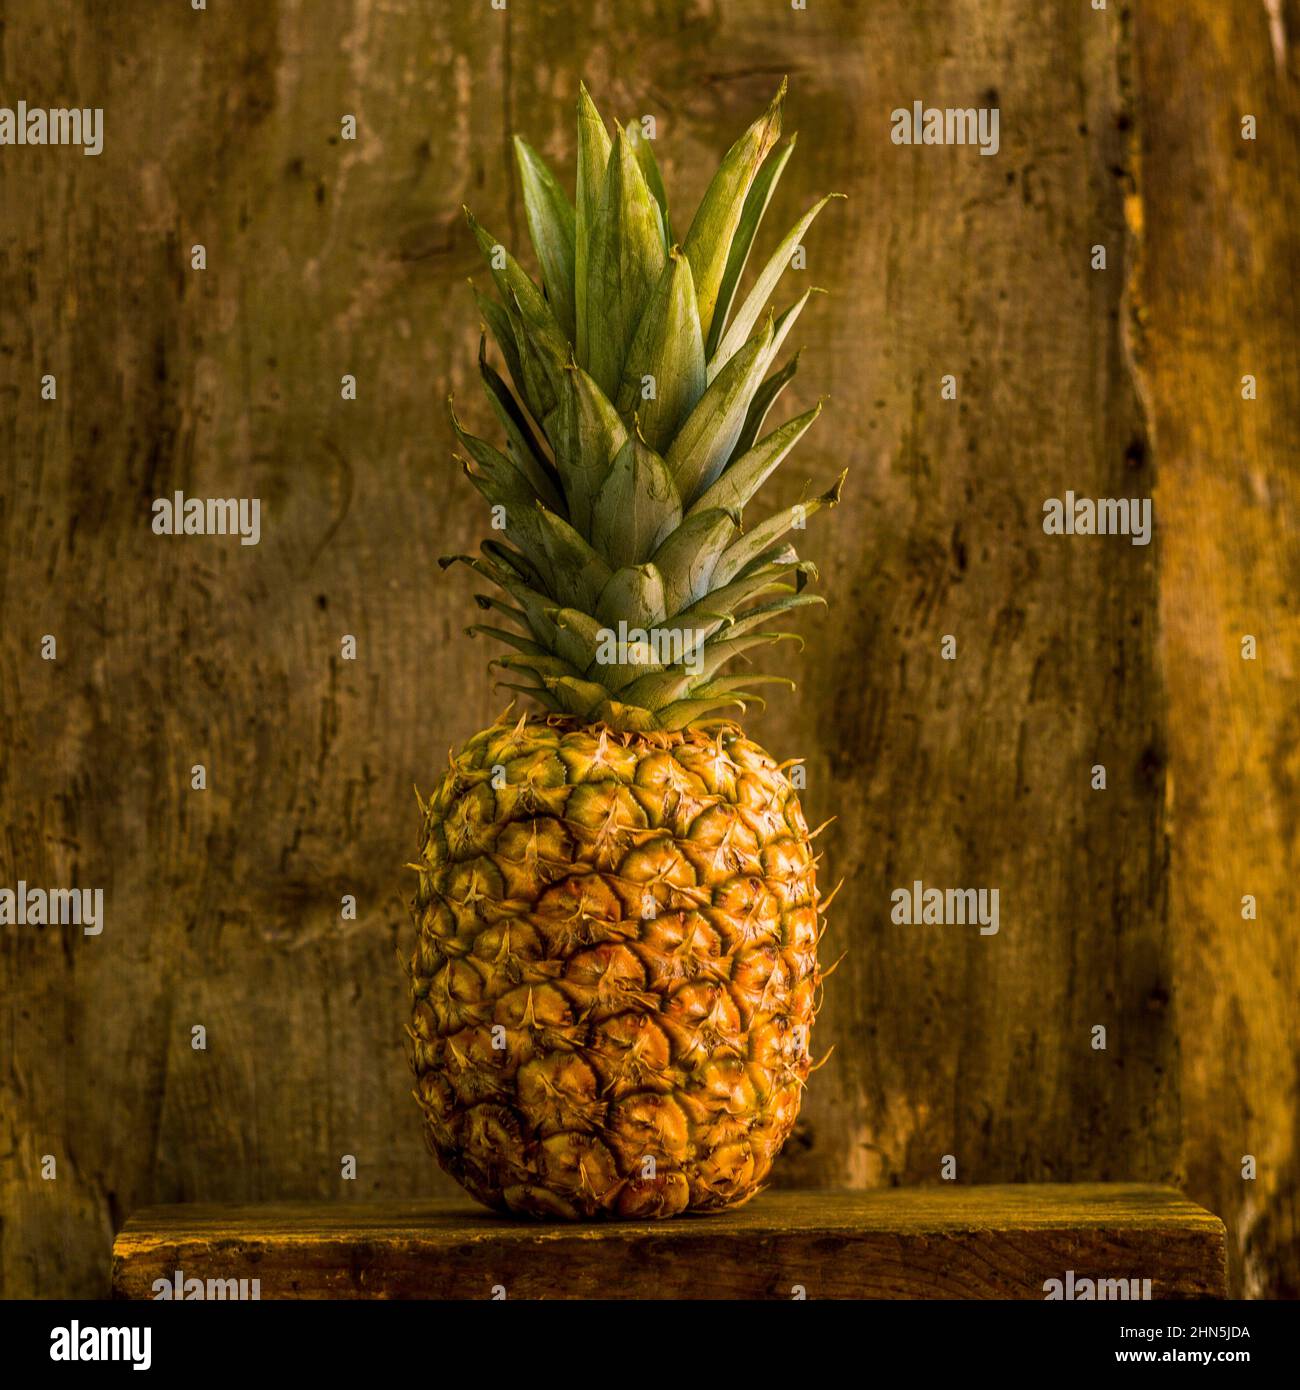 Closeup shot of fresh pineapple on a wooden surface Stock Photo